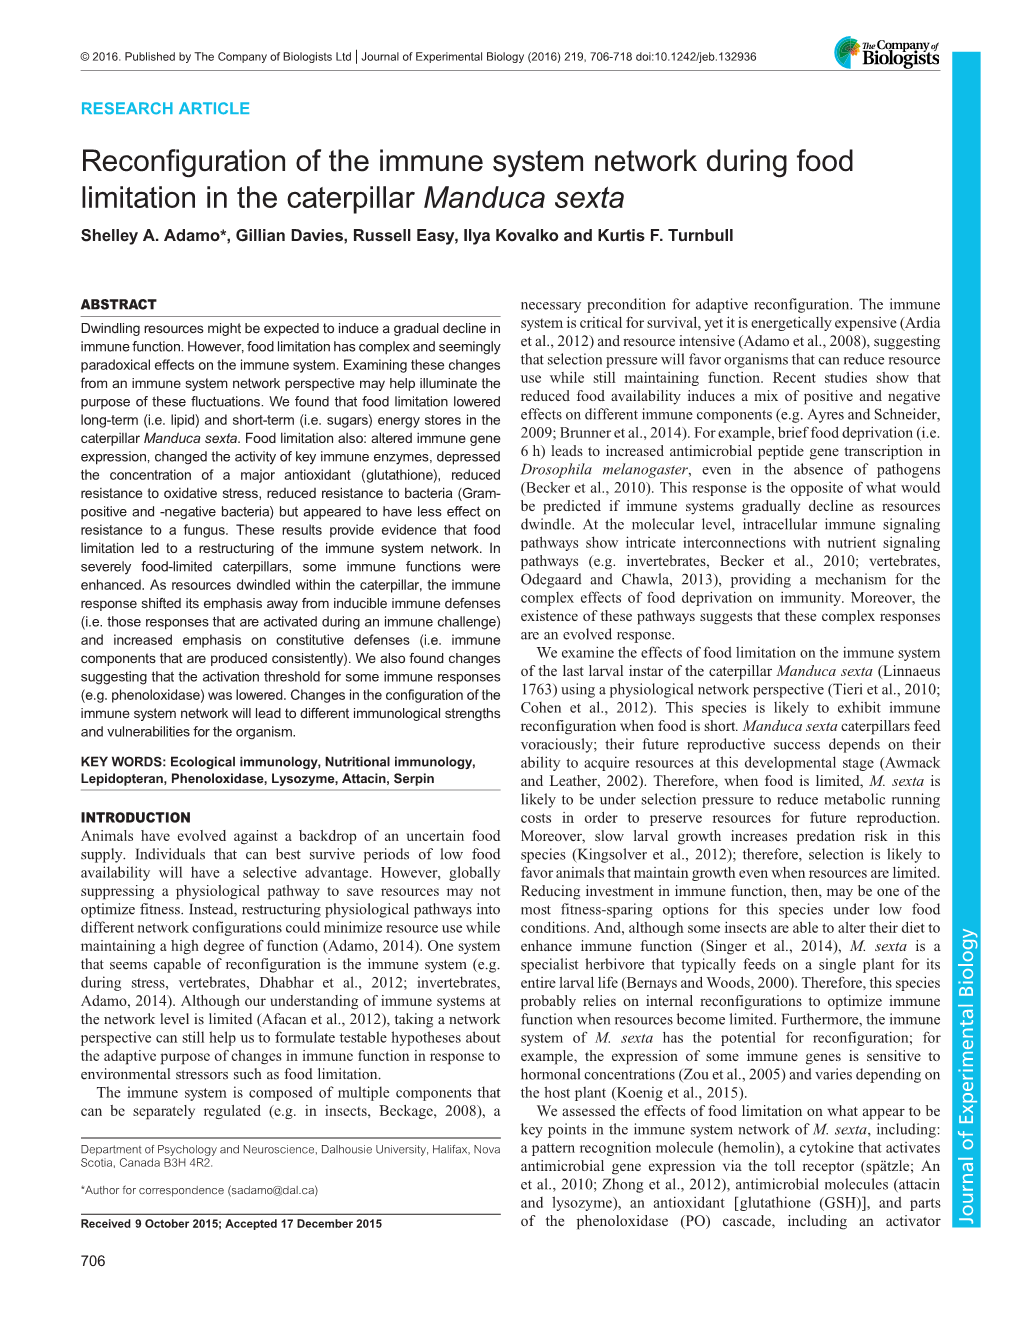 Reconfiguration of the Immune System Network During Food Limitation in the Caterpillar Manduca Sexta Shelley A